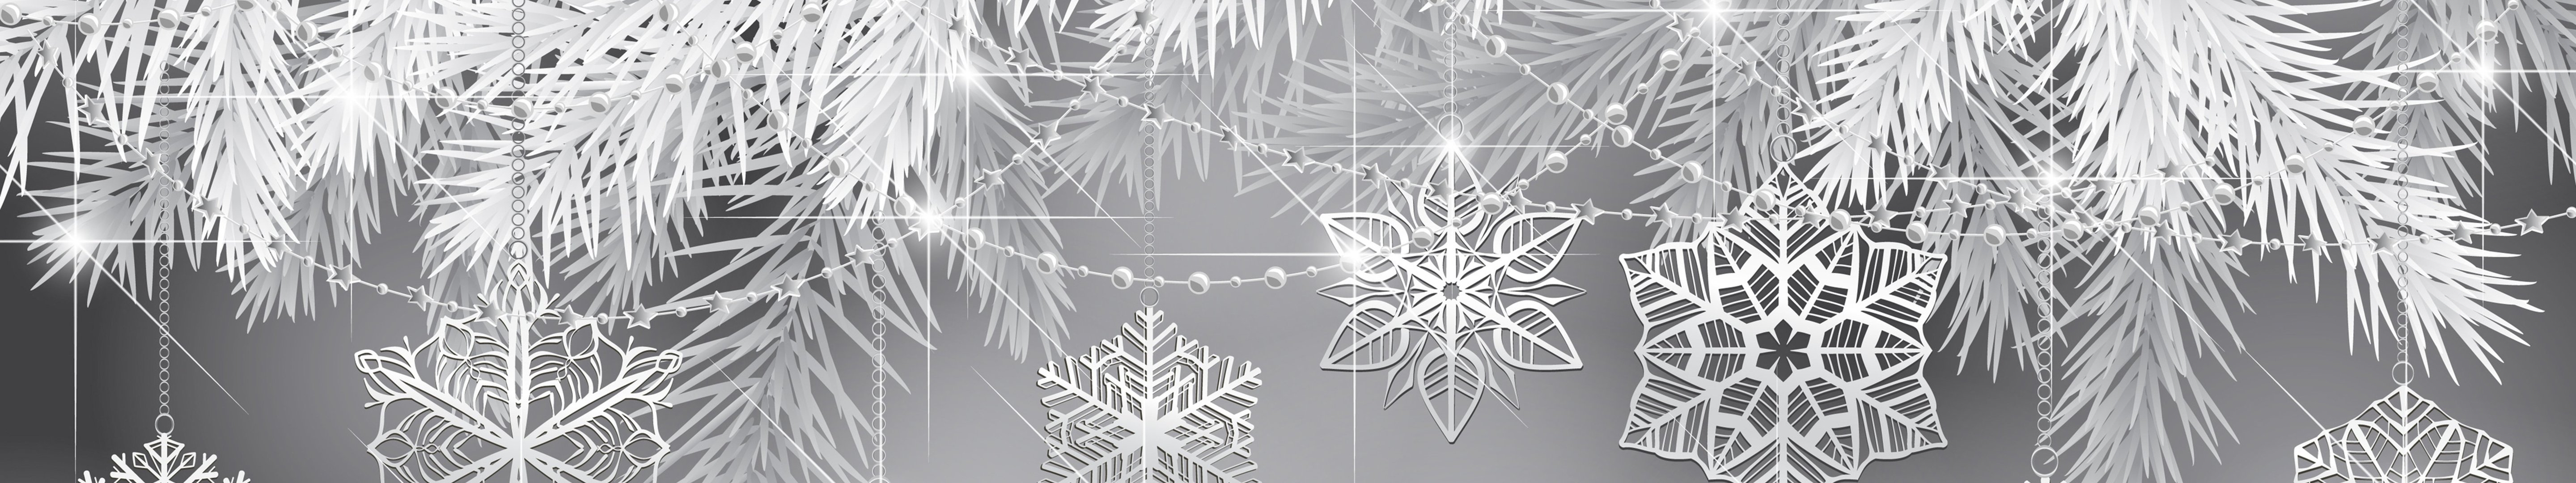 triple, Monitor, Multi, Multiple, Screen, Winter, Hiver, Abstract, Flocon, Neige, Snow, Snowflake Wallpaper